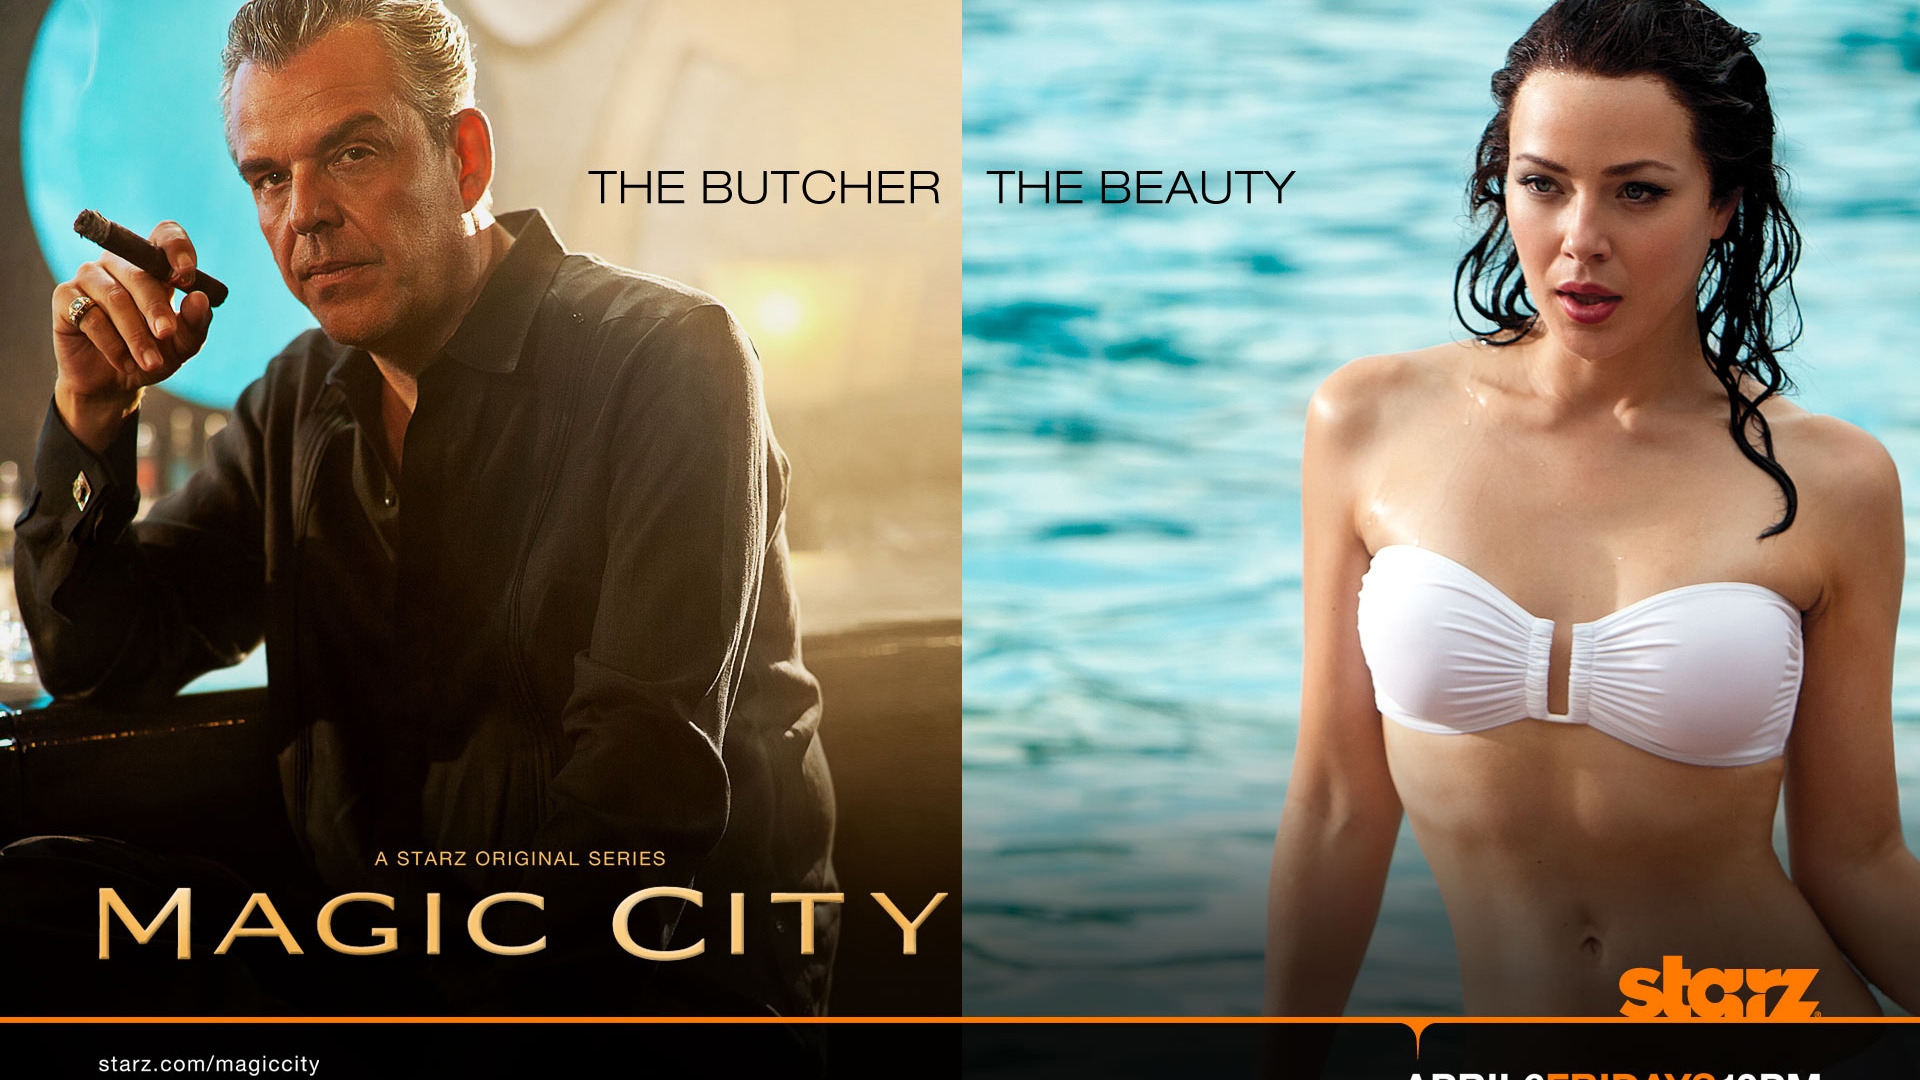 Magic City The Butcher and The Beauty for 1920 x 1080 HDTV 1080p resolution